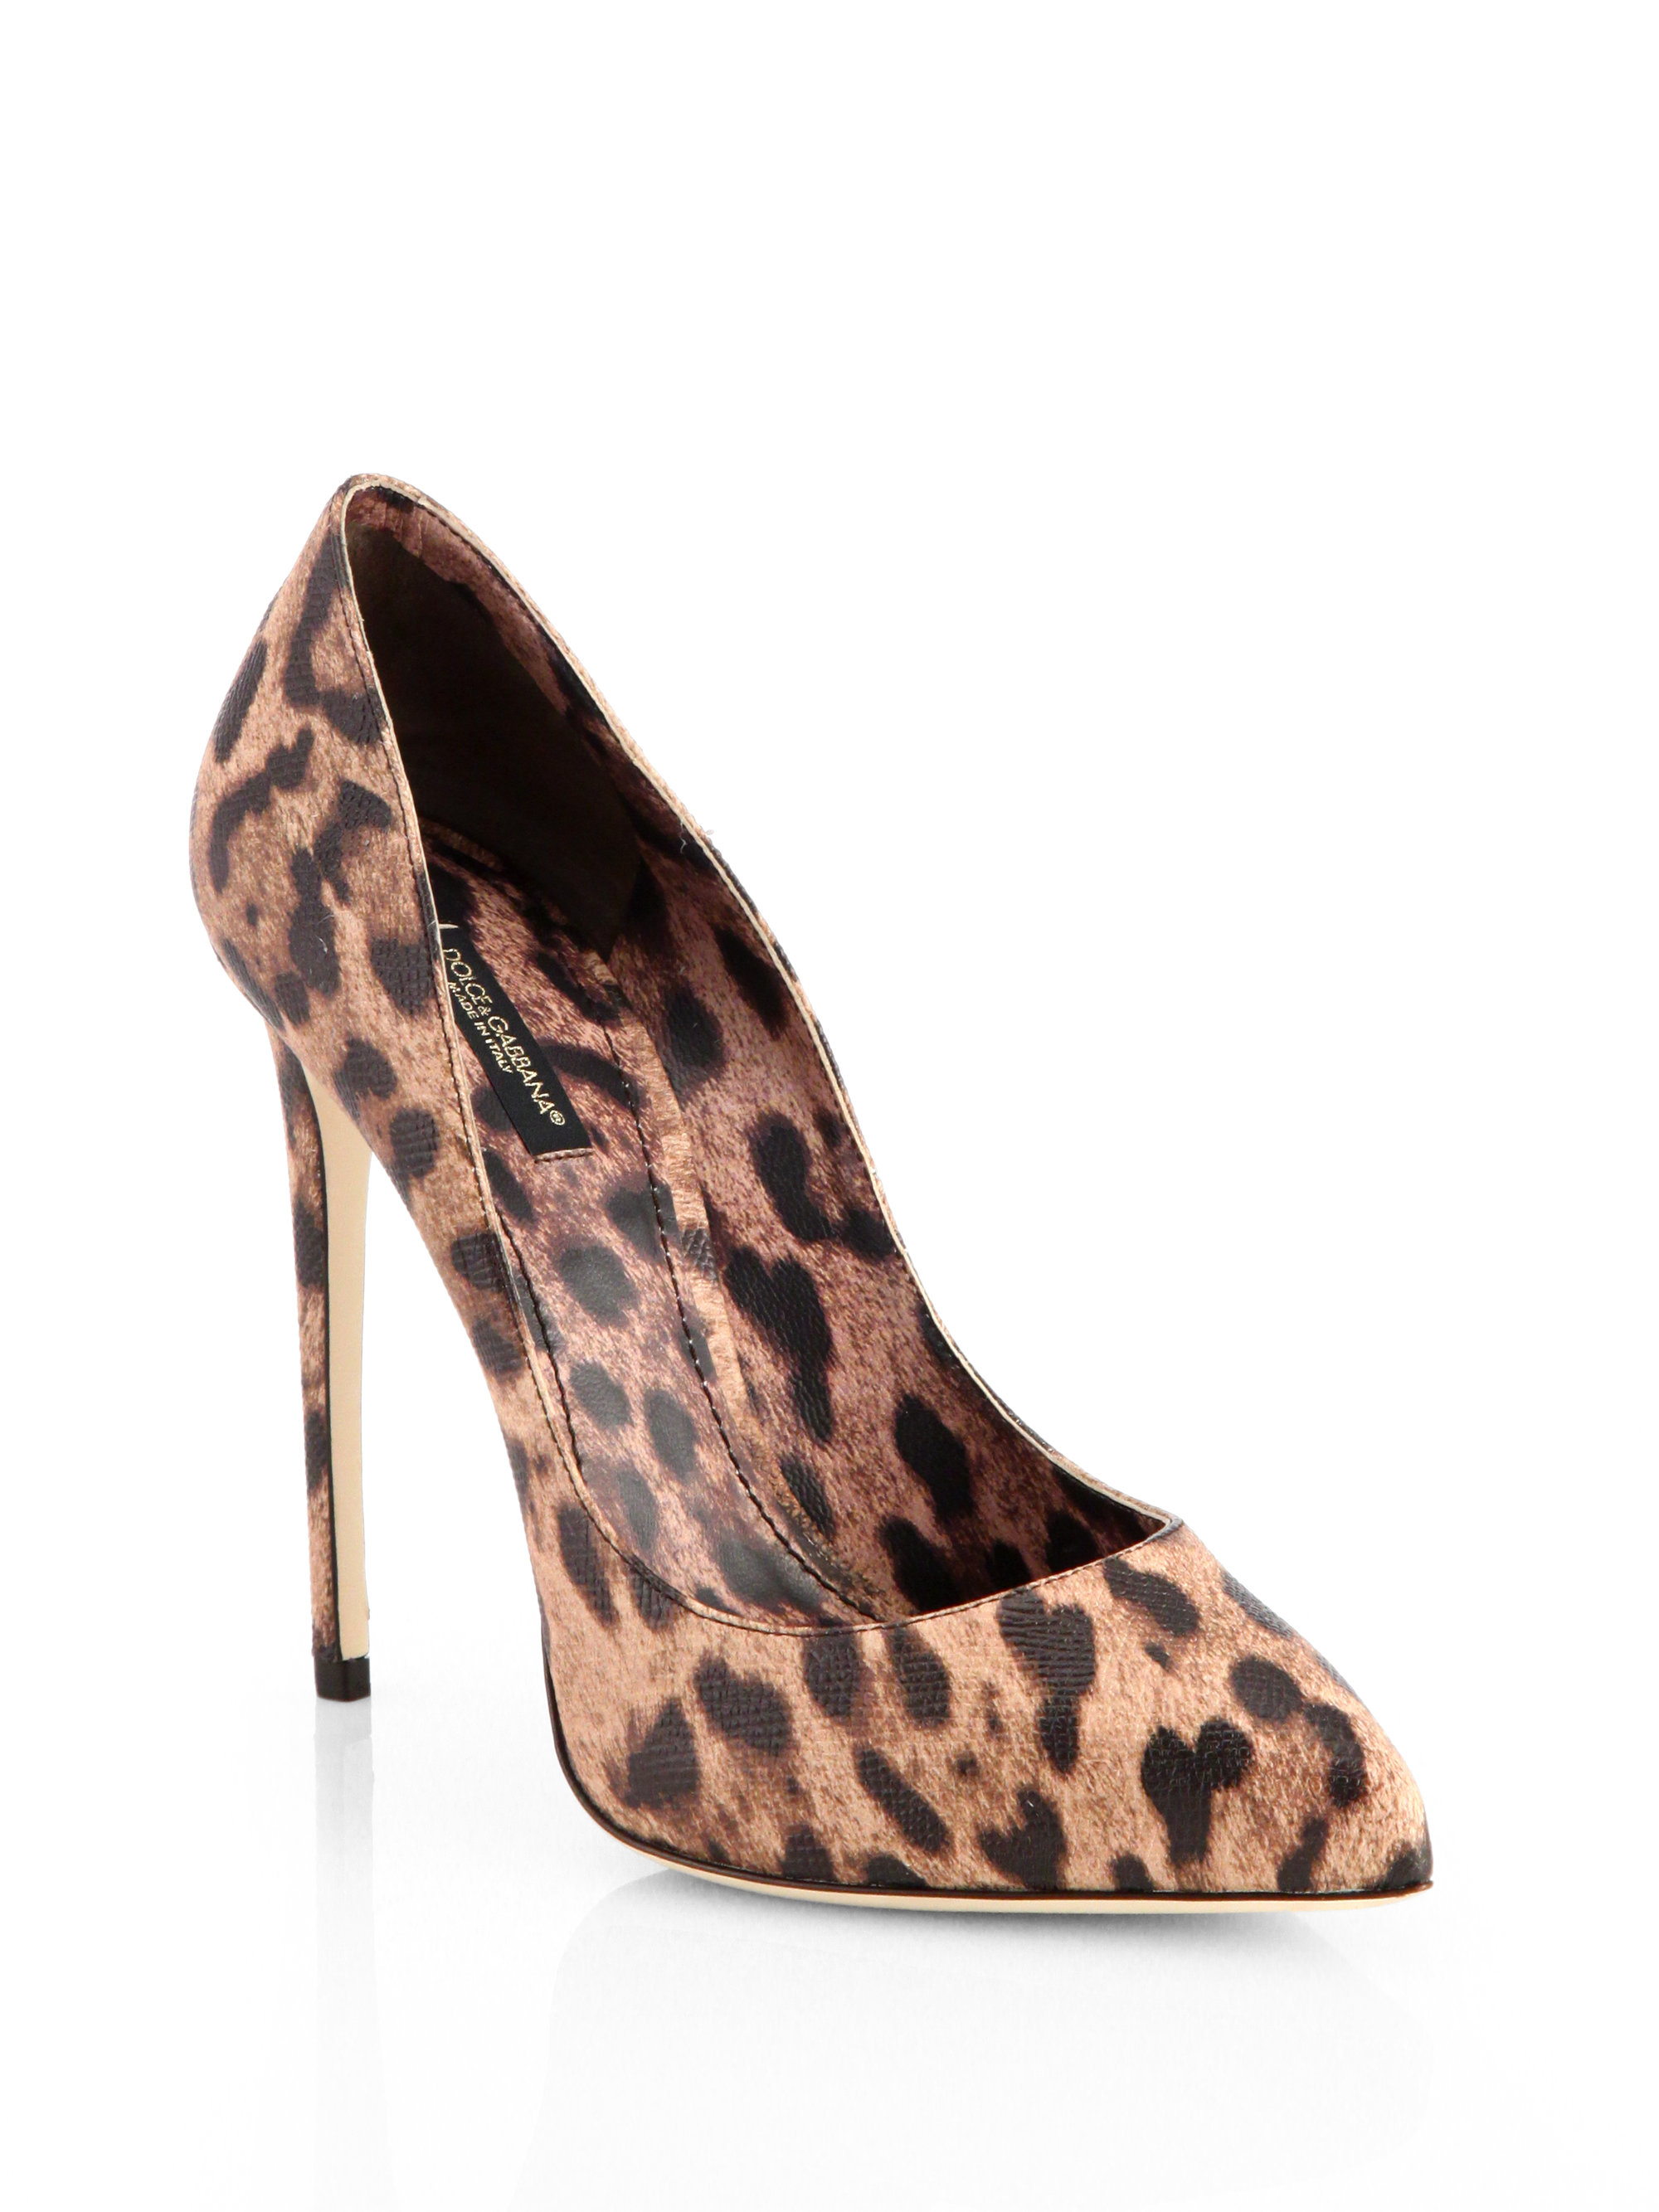 dolce and gabbana leopard print shoes